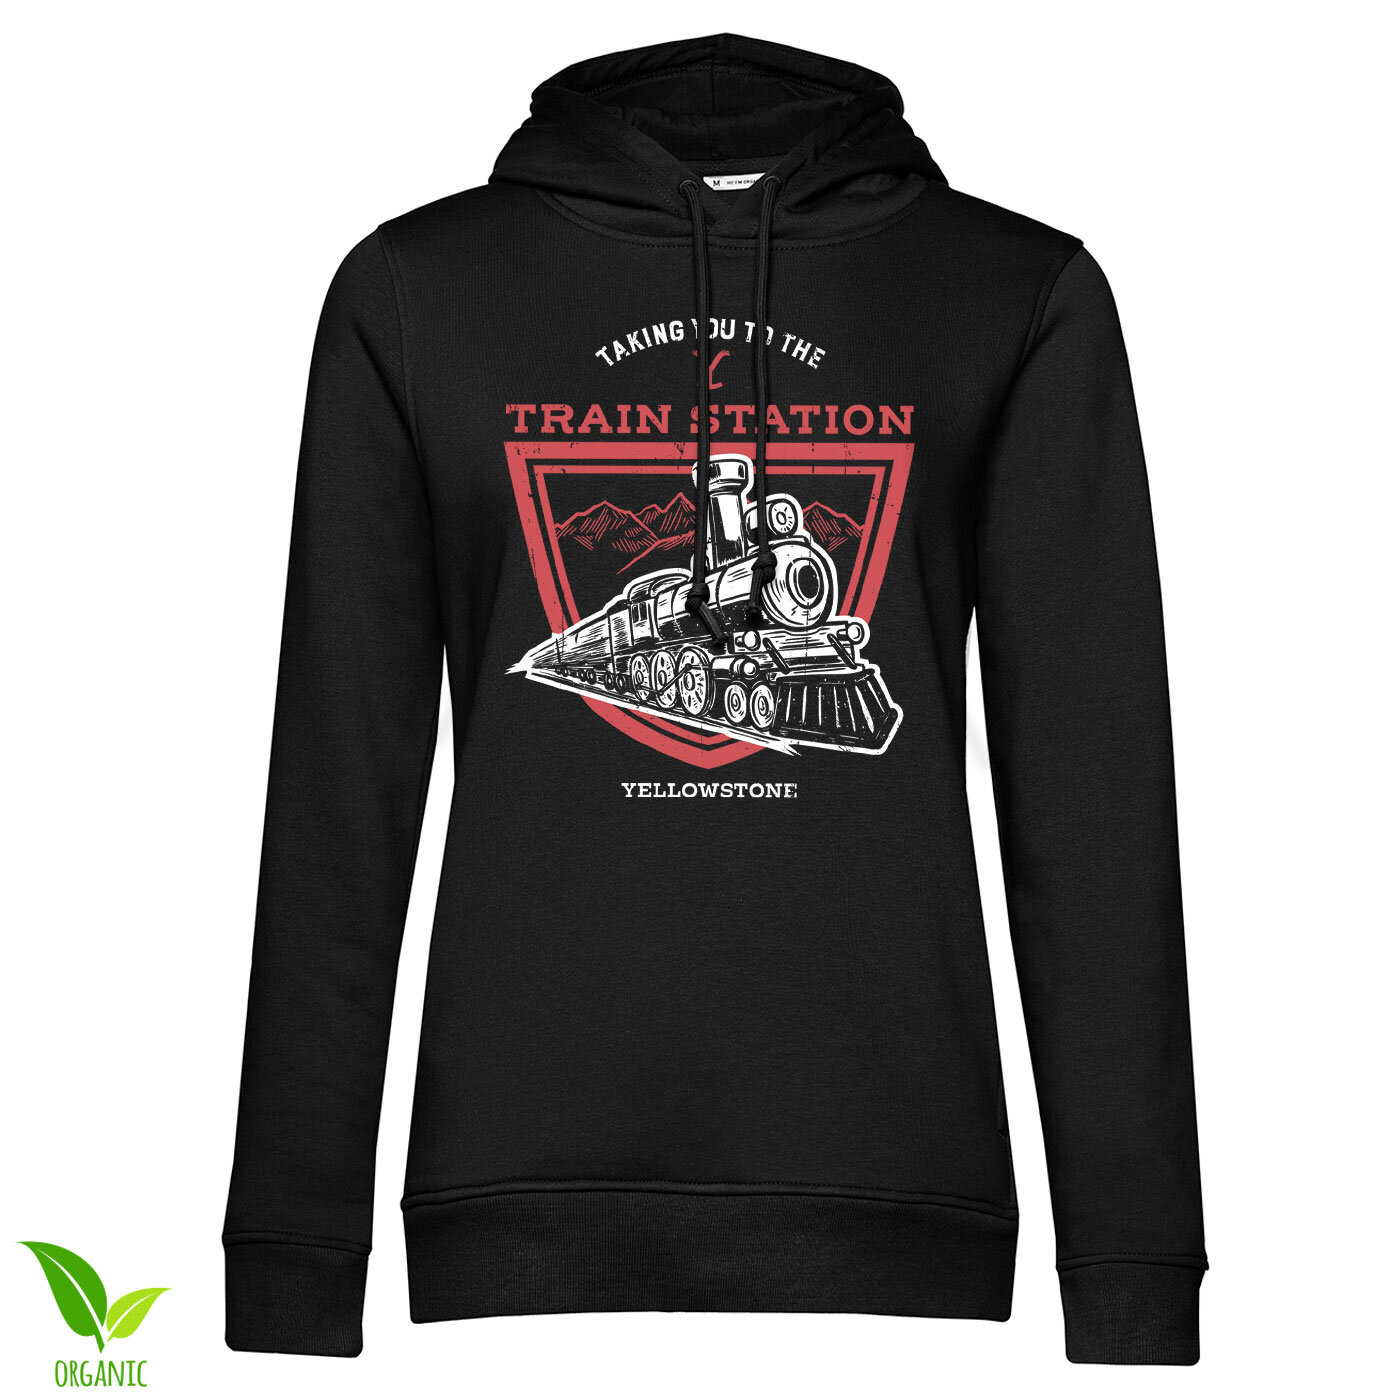 Taking You To The Train Station Girls Hoodie